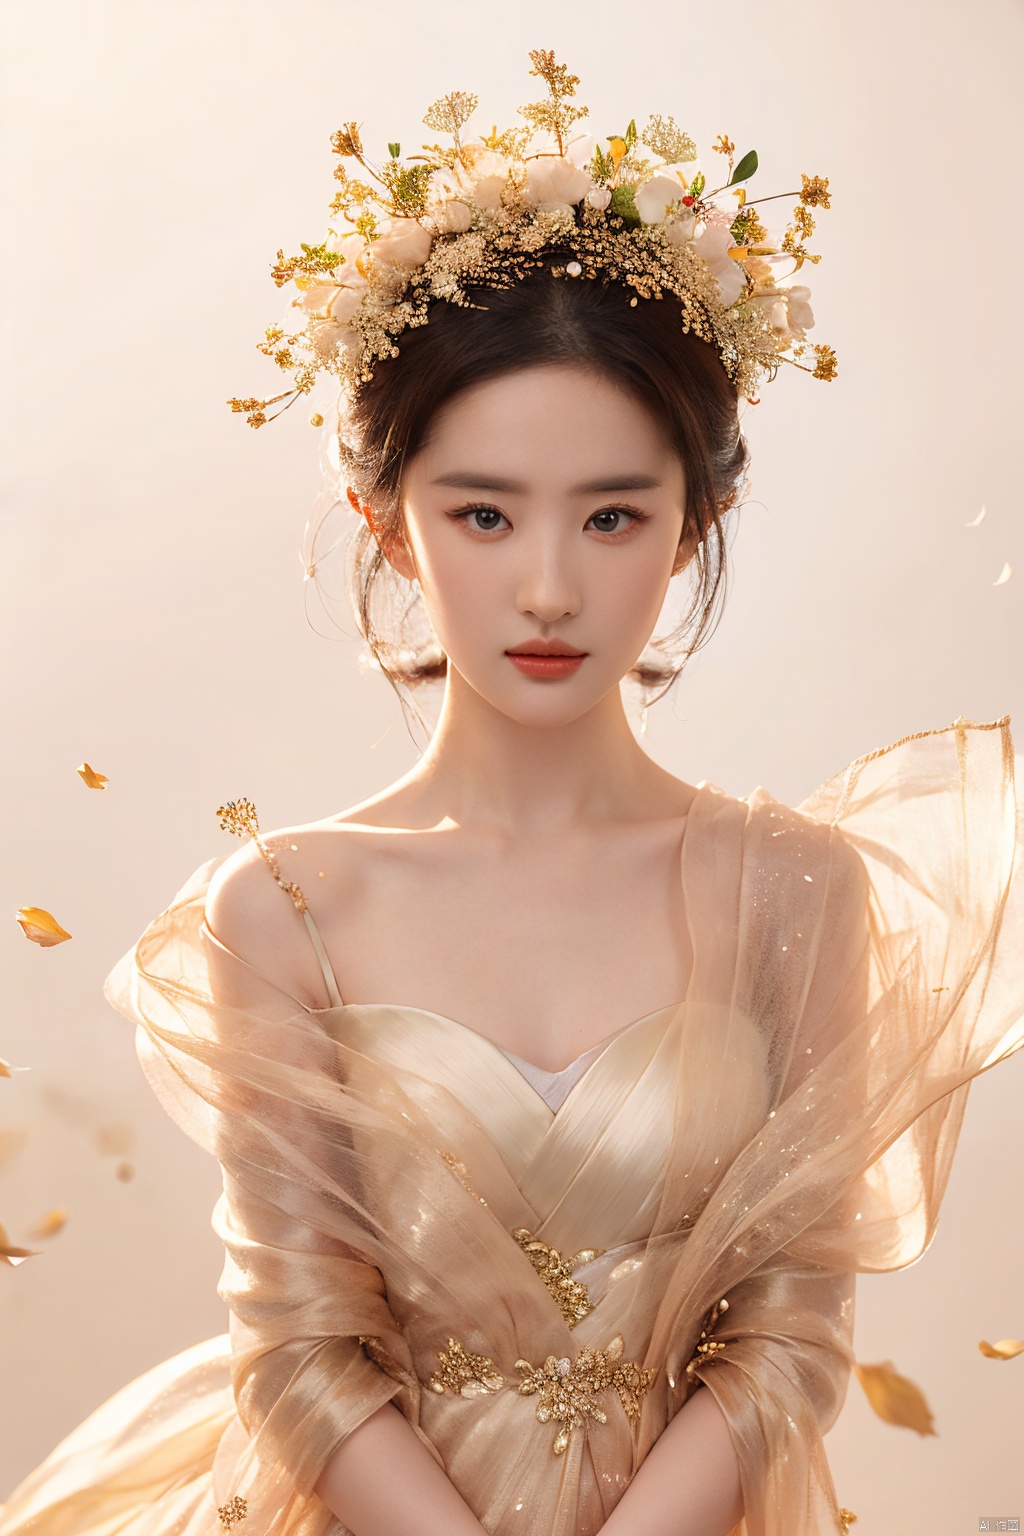  (1girl:1.1),stars in the eyes,(pure girl:1.1),(full body:0.6),There are many scattered luminous petals,contourdeepening,white_background,cinematicangle,goldpowder,,刘亦菲, liuyifei